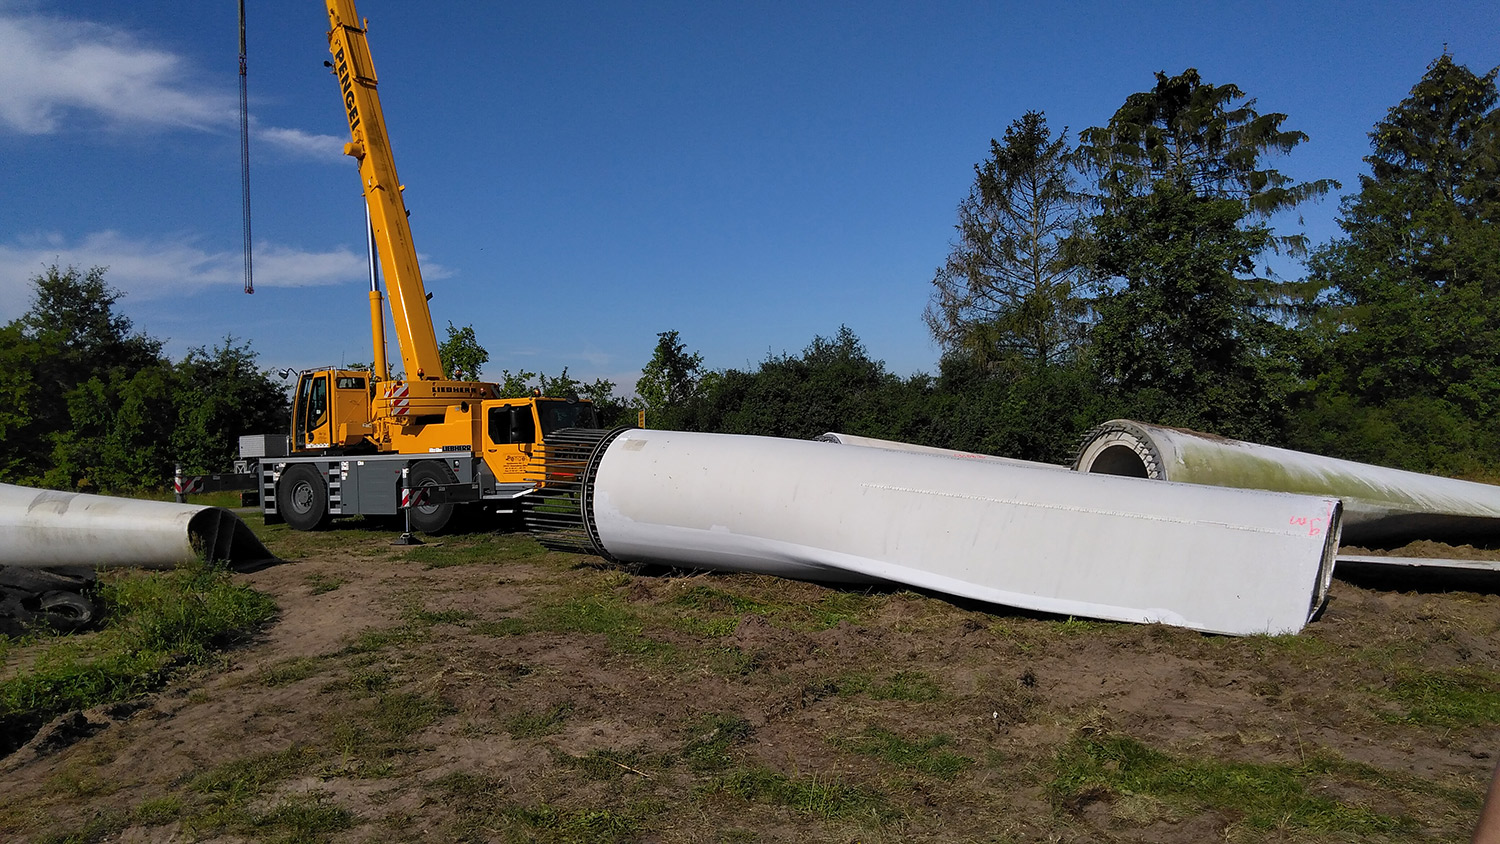 Averaging over 45 metres/150 feet in length and weighing upwards of a dozen tons each, wind turbine blades take up huge amounts of space in landfills. Once there, the ultra-sturdy, fibre-reinforced plastics they’re made of don’t break down easily. Decommissioned wind turbine blades, if they’re not just stockpiled, are often destined for landfills today. The main alternative, incinerating them for energy, creates additional pollution.